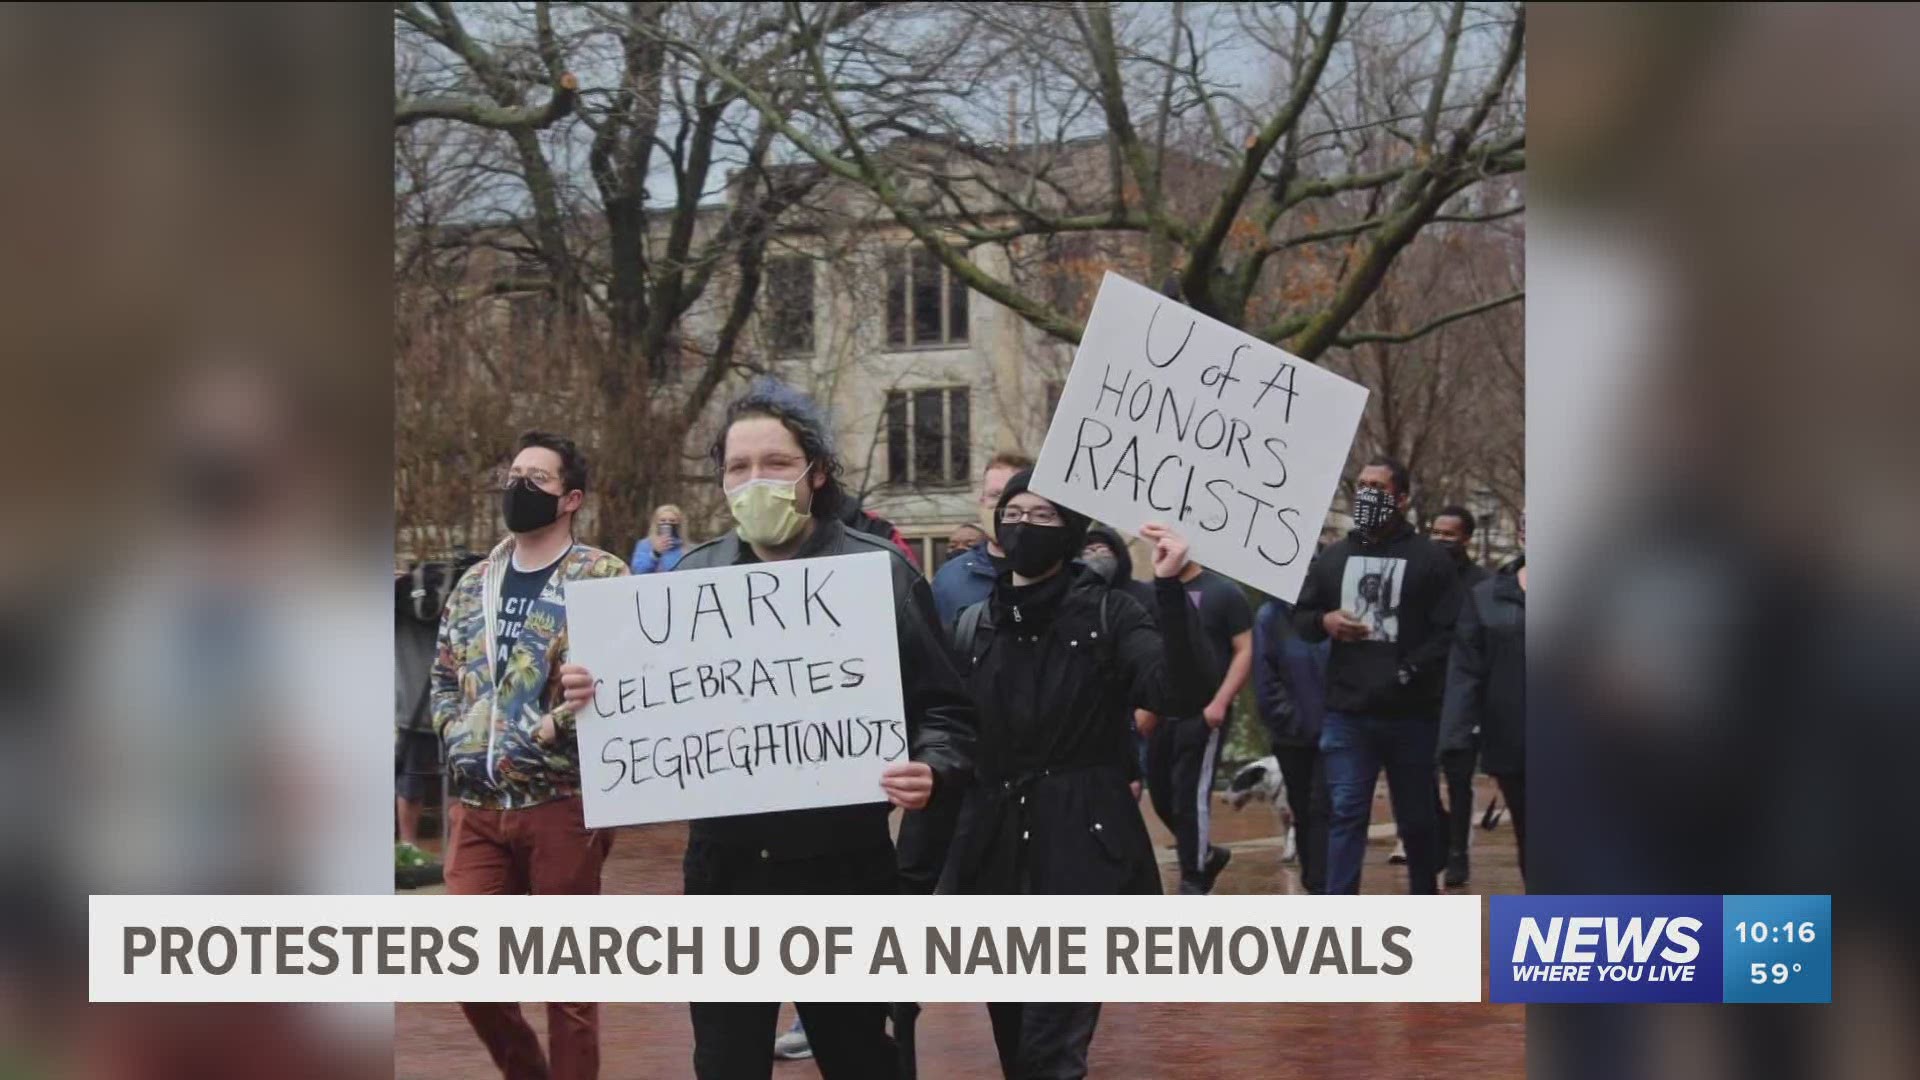 A protest took place today at the University of Arkansas with students aiming to remove the names of J. William Fullbright and Charles Brough from the campus.